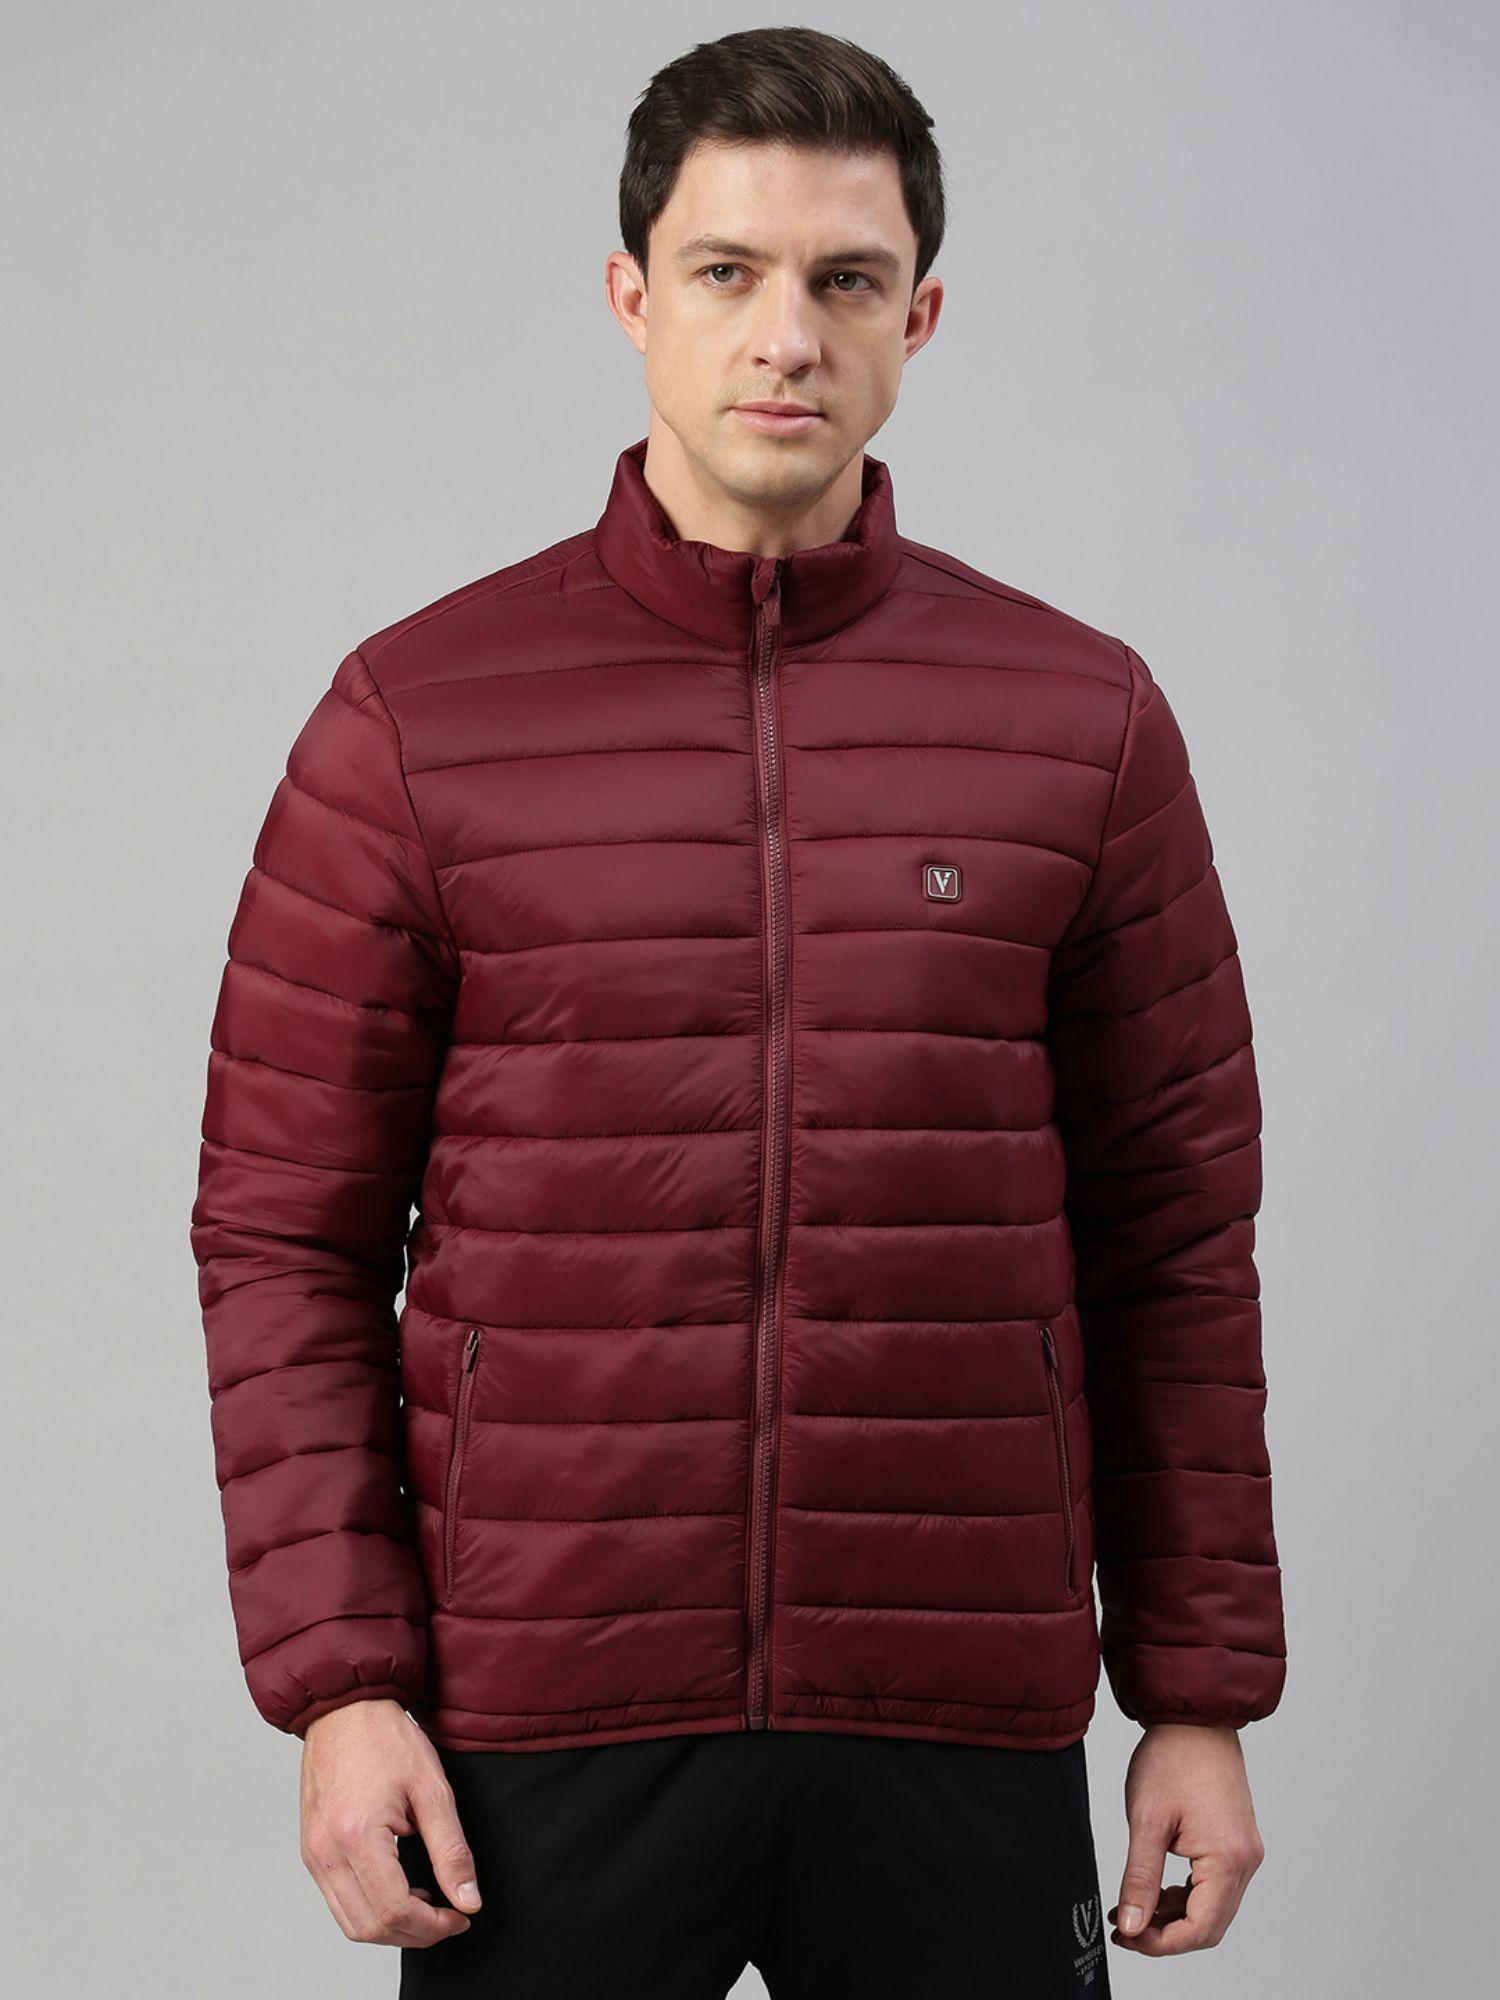 Athleisure Extra Warm and High Neck Woven Jacket - Maroon